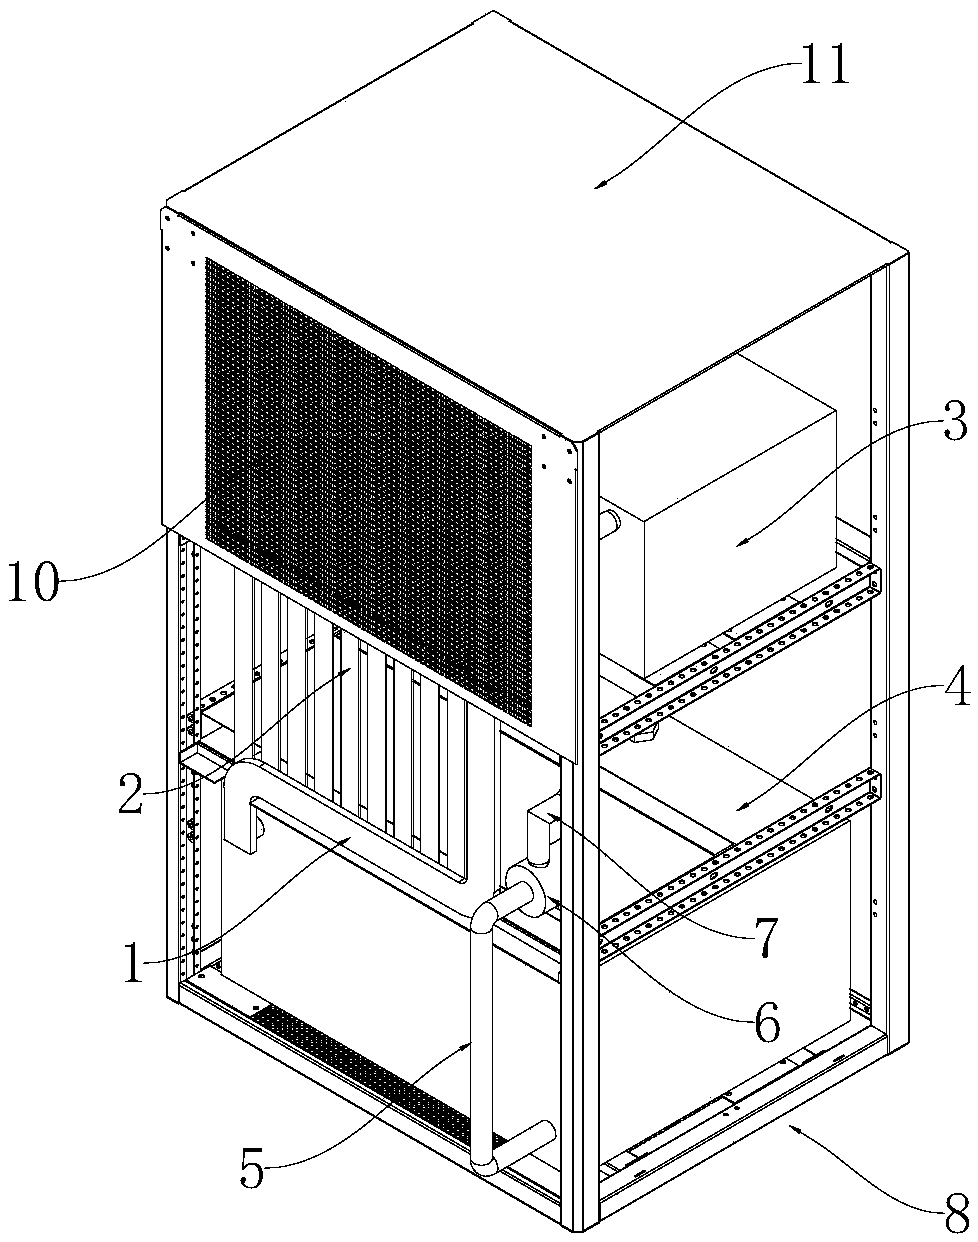 Heat dissipation structure and heat dissipation method for metal fuel cells